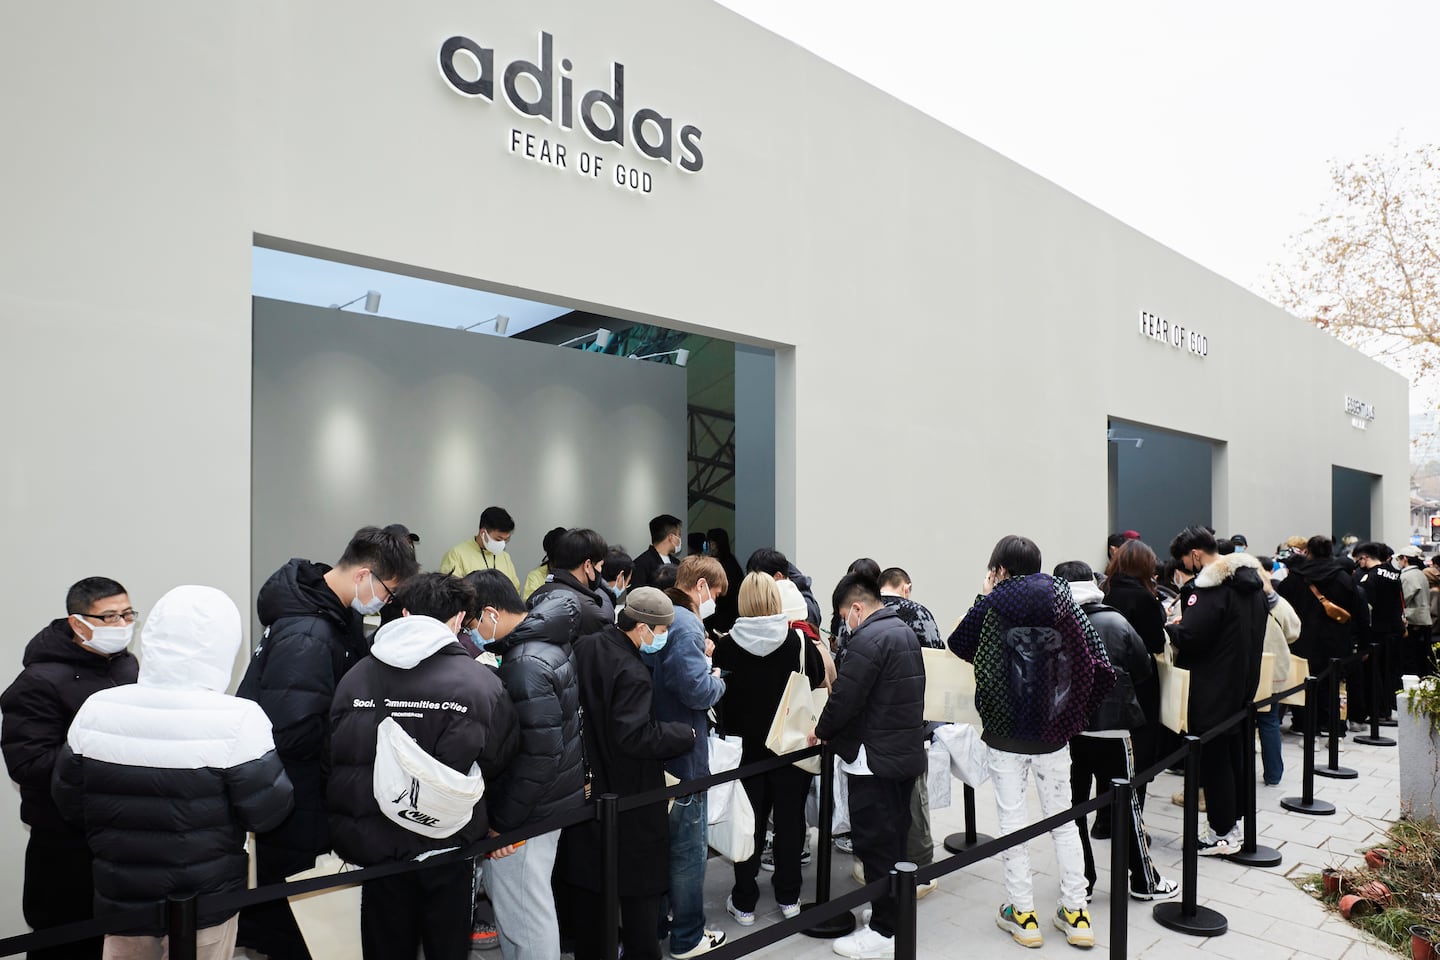 A line forms outside of the Adidas x Fear of God exhibition space at Innersect.